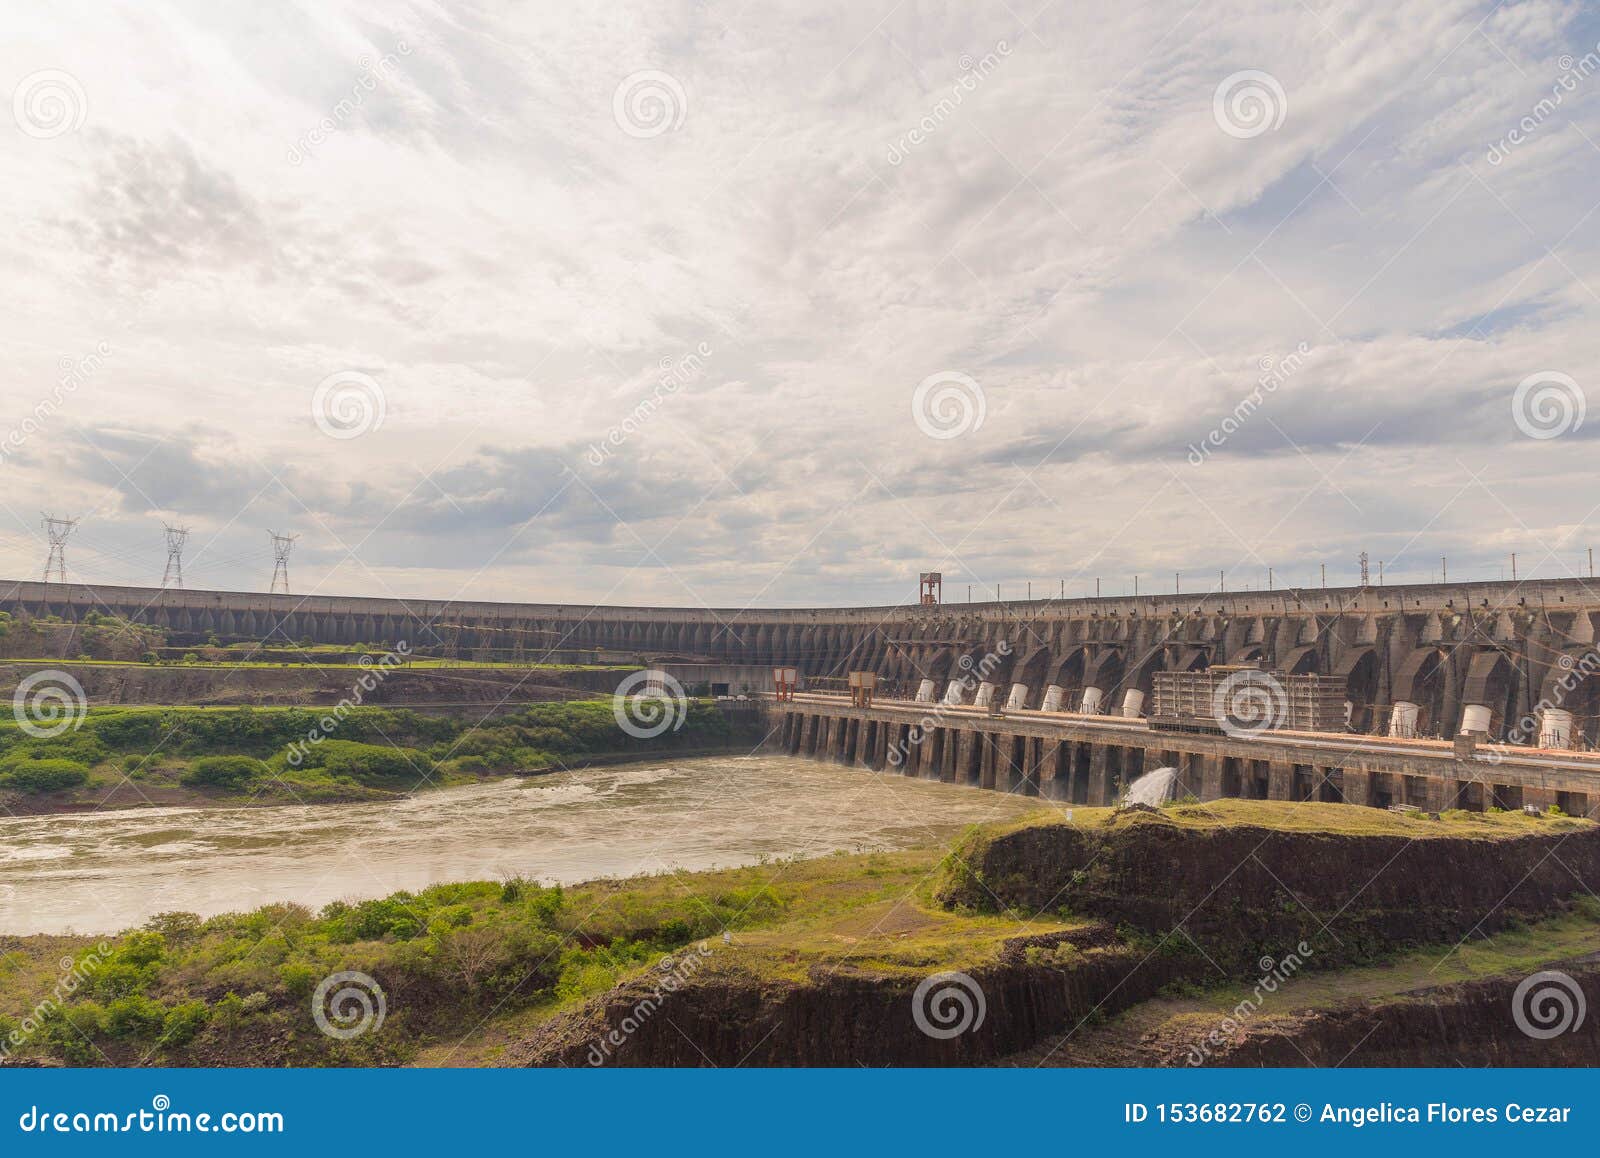 Dam Of Itaipu Hydroelectric Power Plant 06 Editorial Photography Image Of Largest Industry